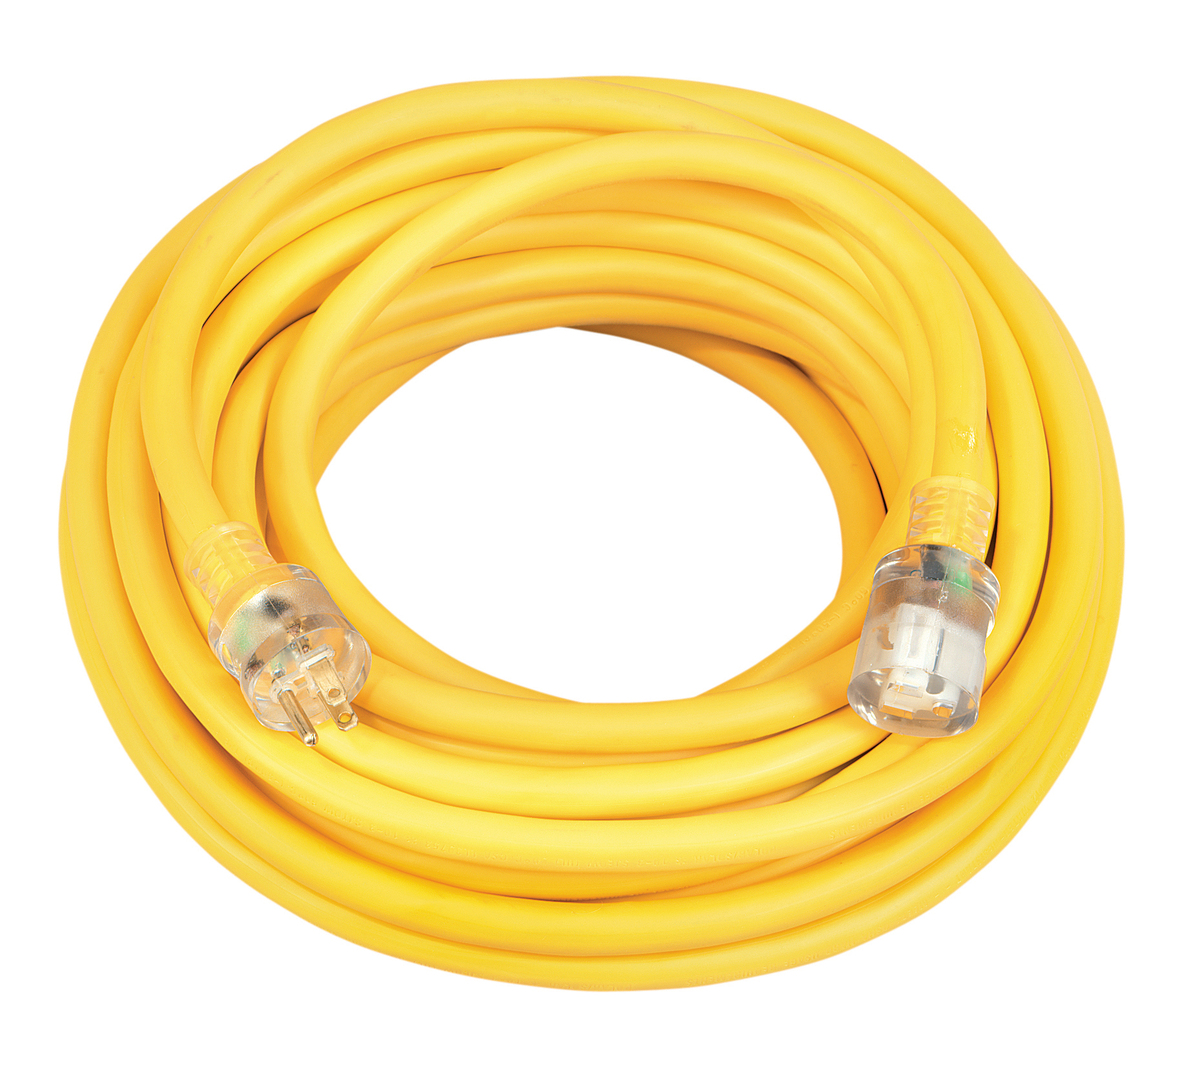 SOUTHWIRE, 10/3 SJTW 50' YELLOW OUTDOOR EXTENSION CORD WITH POWER